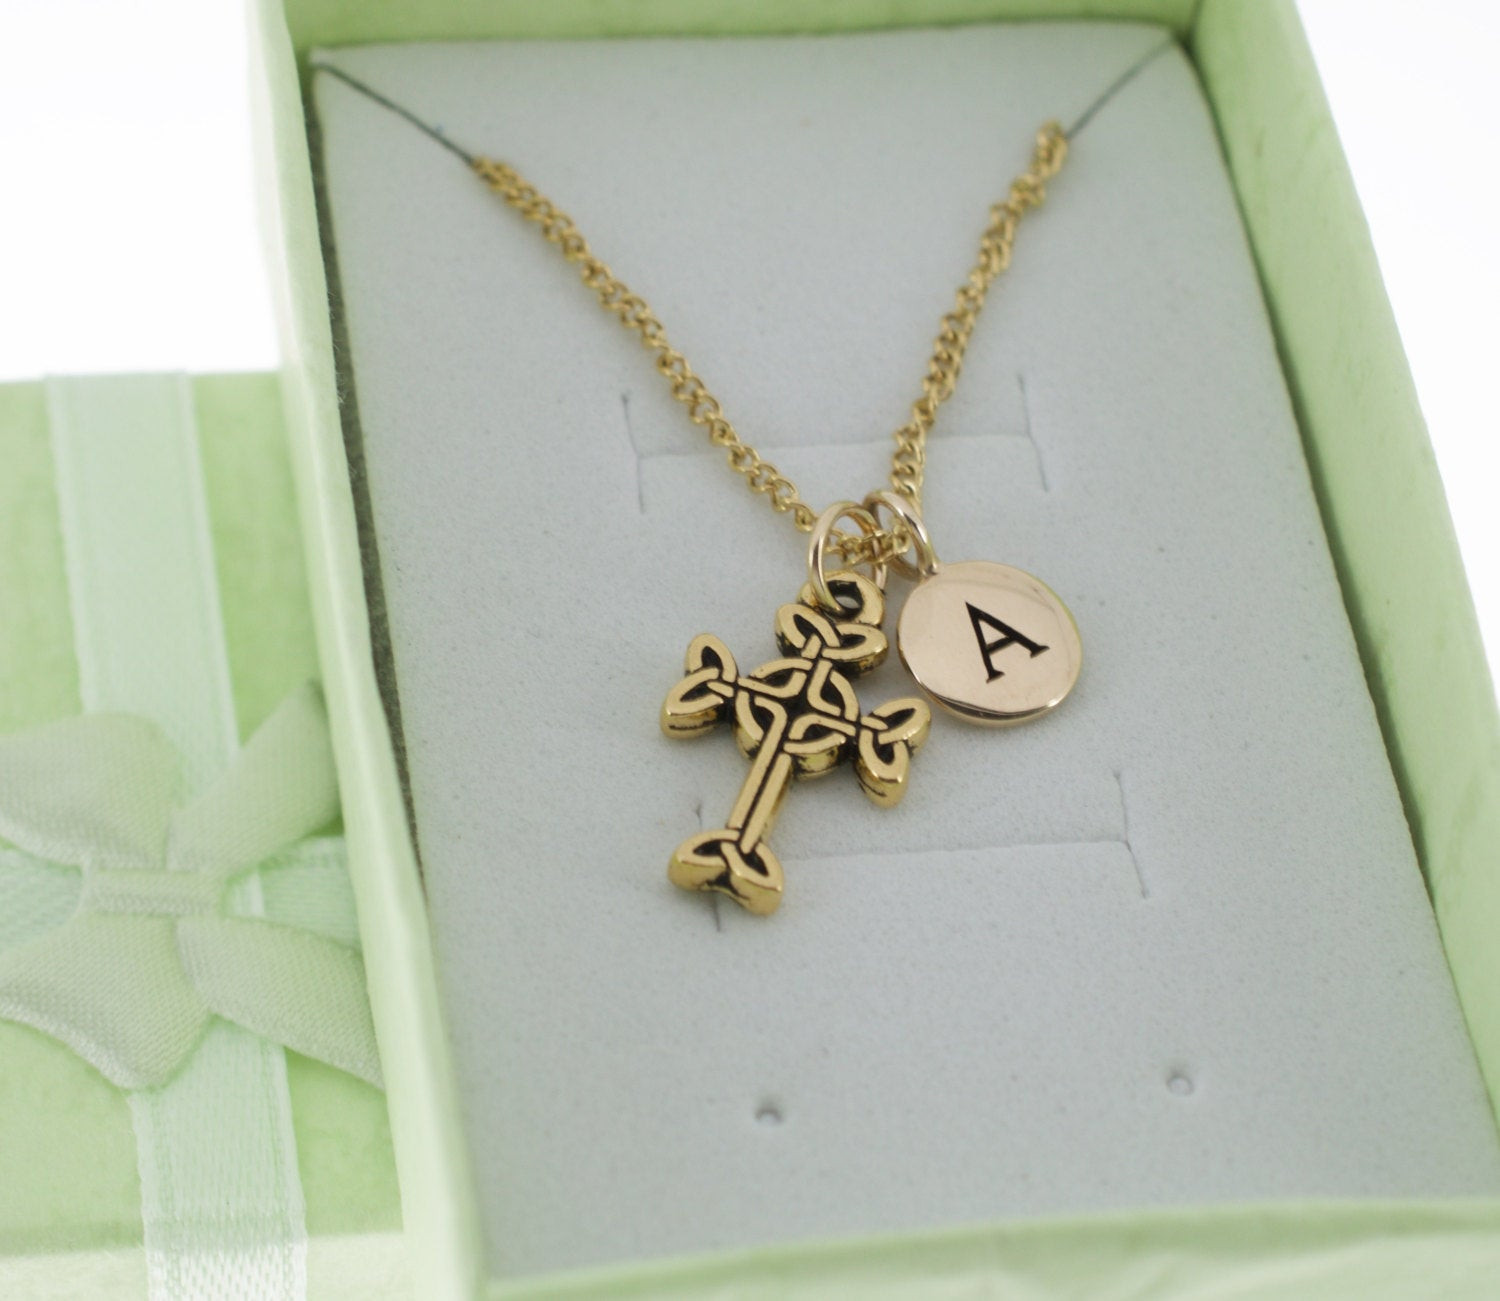 Cross Necklace For Girl
 Little Girl s Celtic Cross Necklace in gold plated pewter